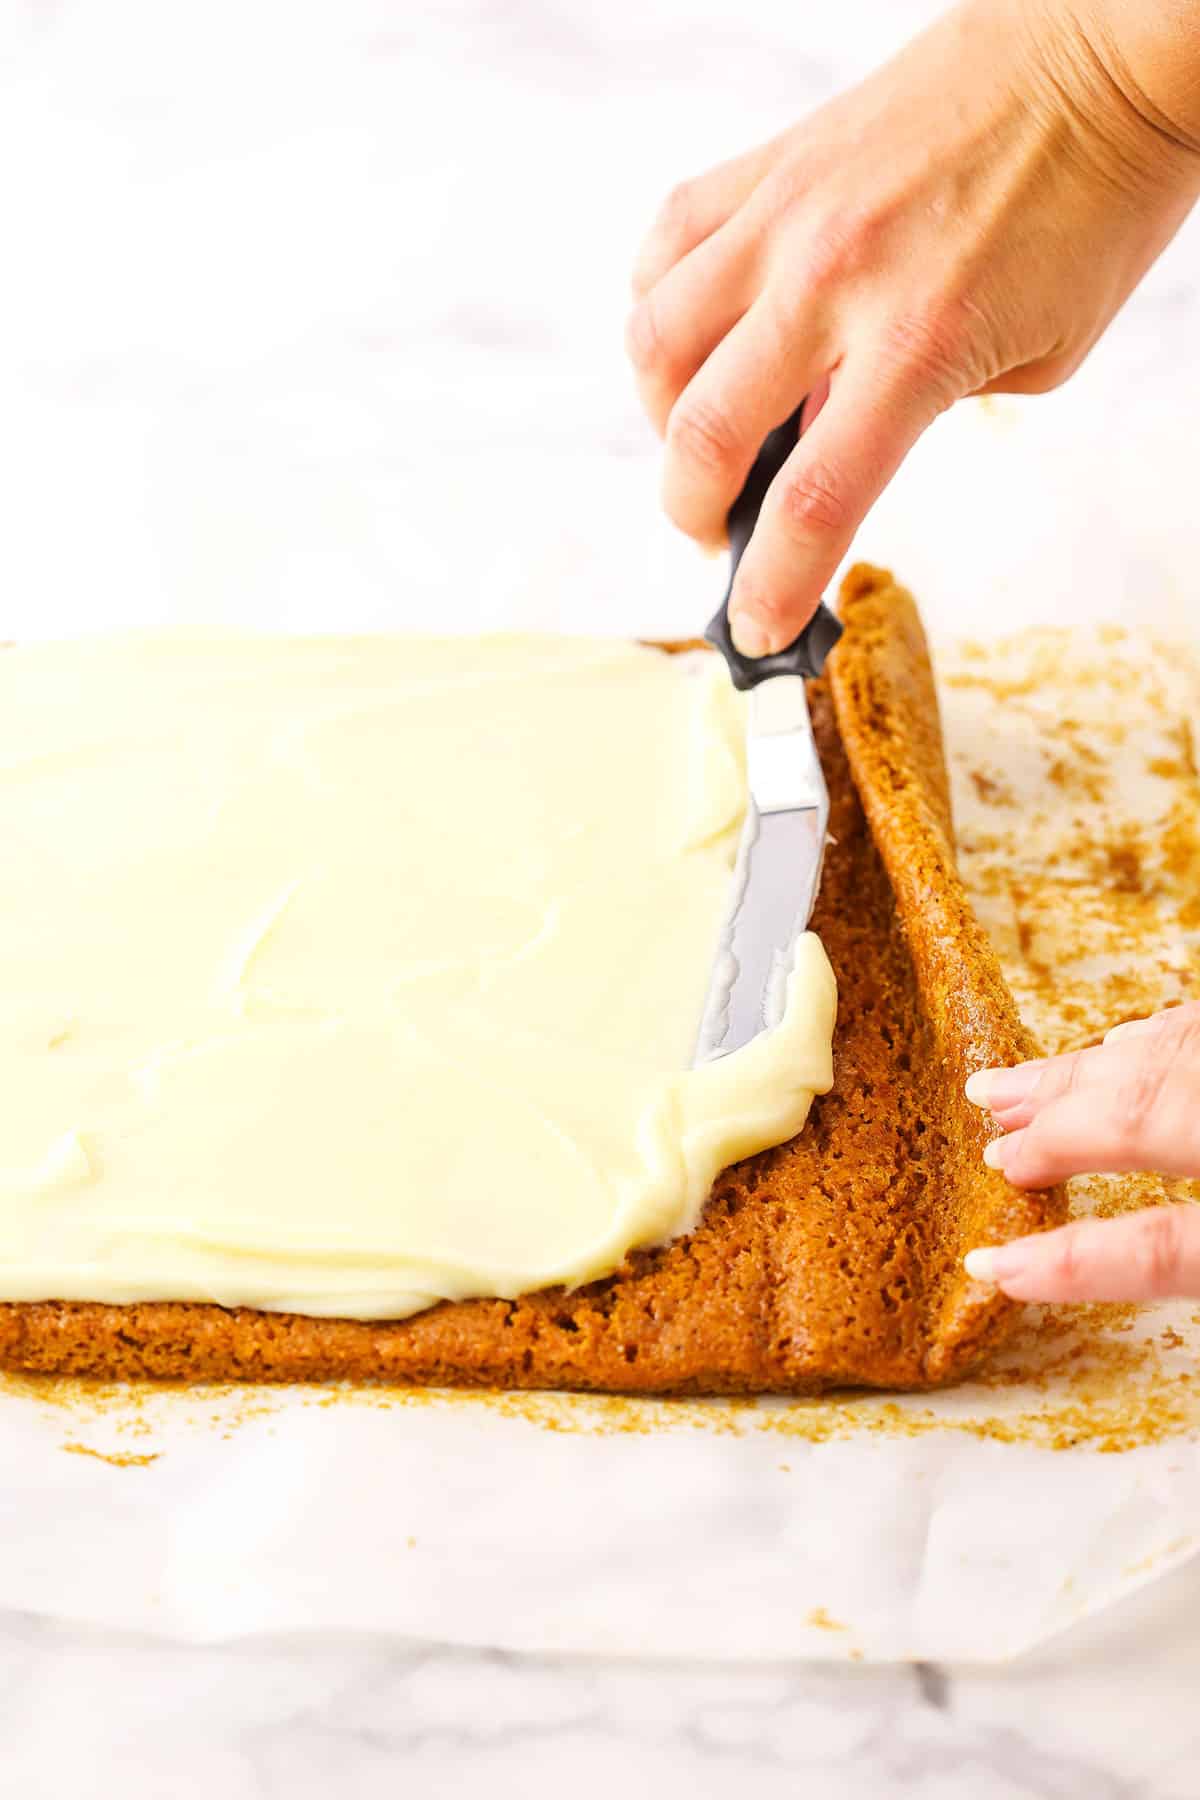 A step in making Pumpkin Roll Cake showing the filling being spread evenly over the cooled cake using an offset spatula